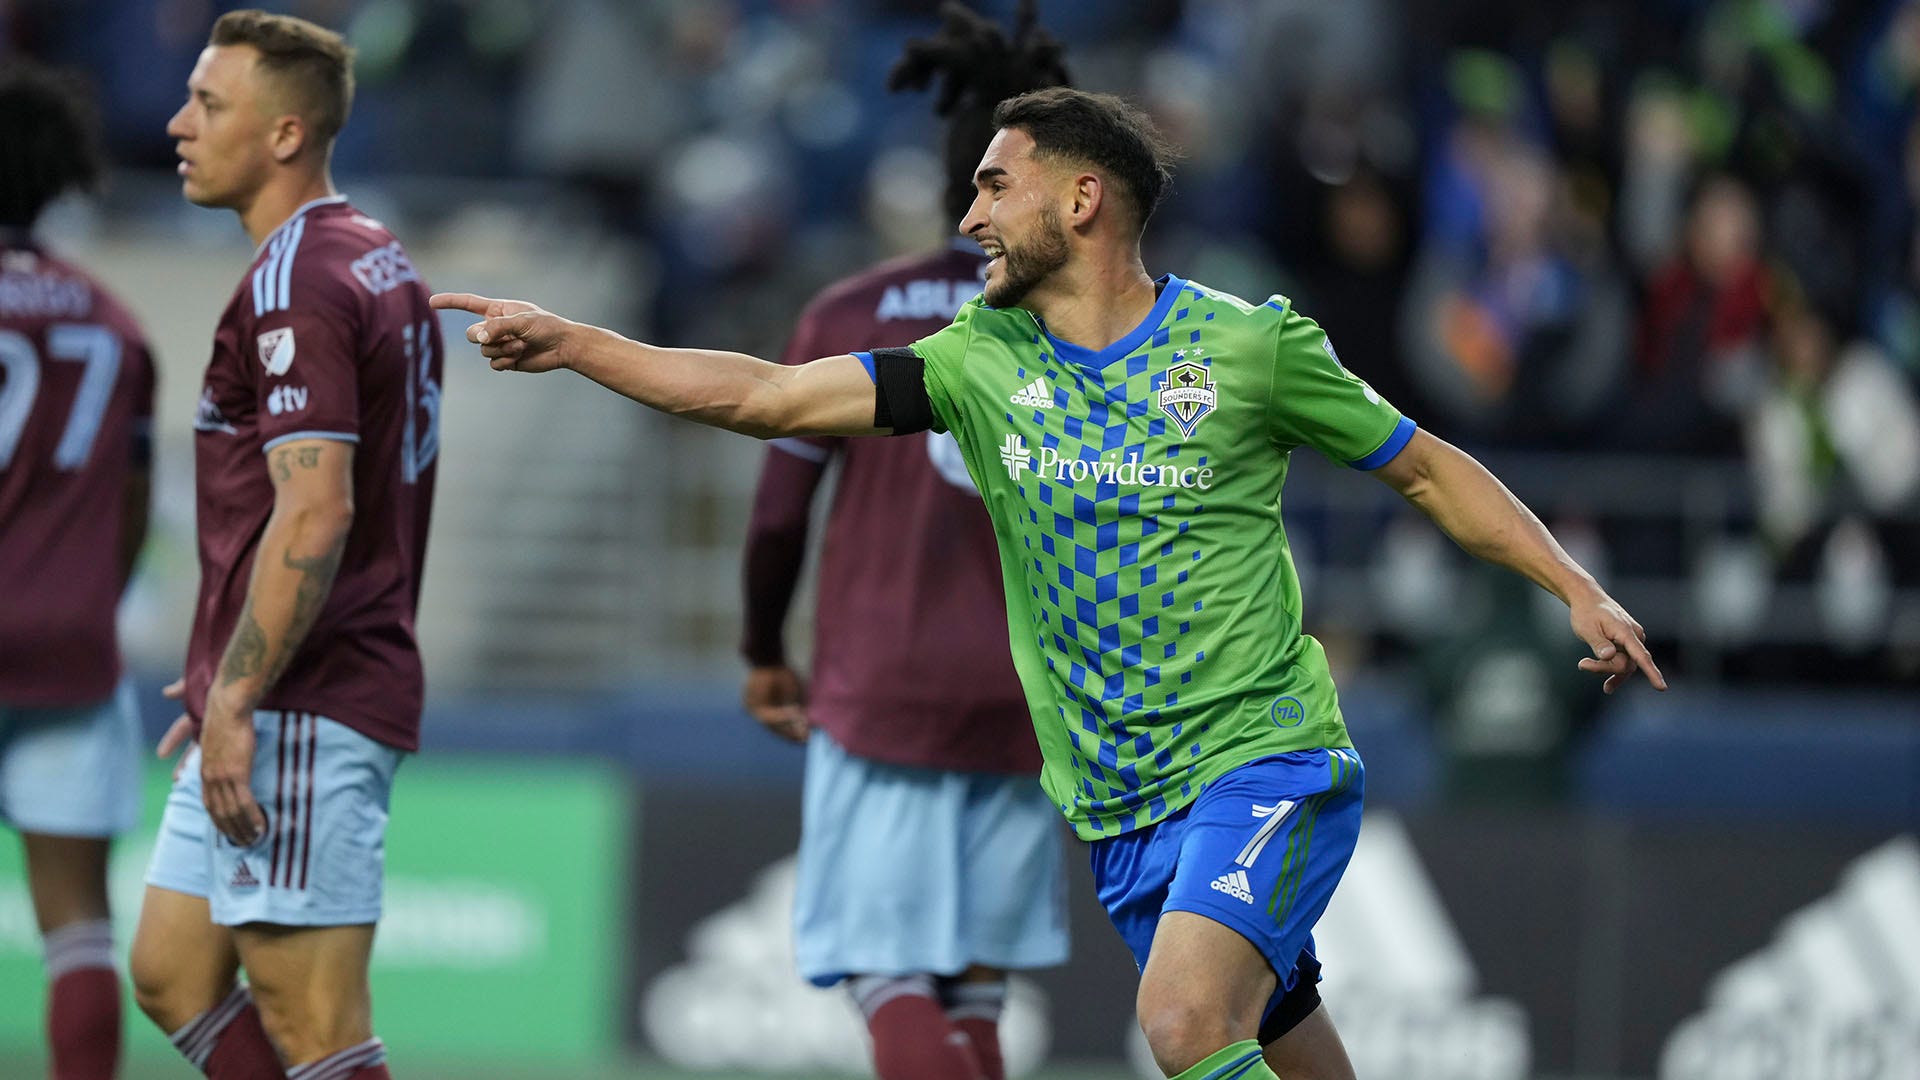 Sounders vs Earthquakes: Where to watch the match online, stream, TV channels, and kick-off time